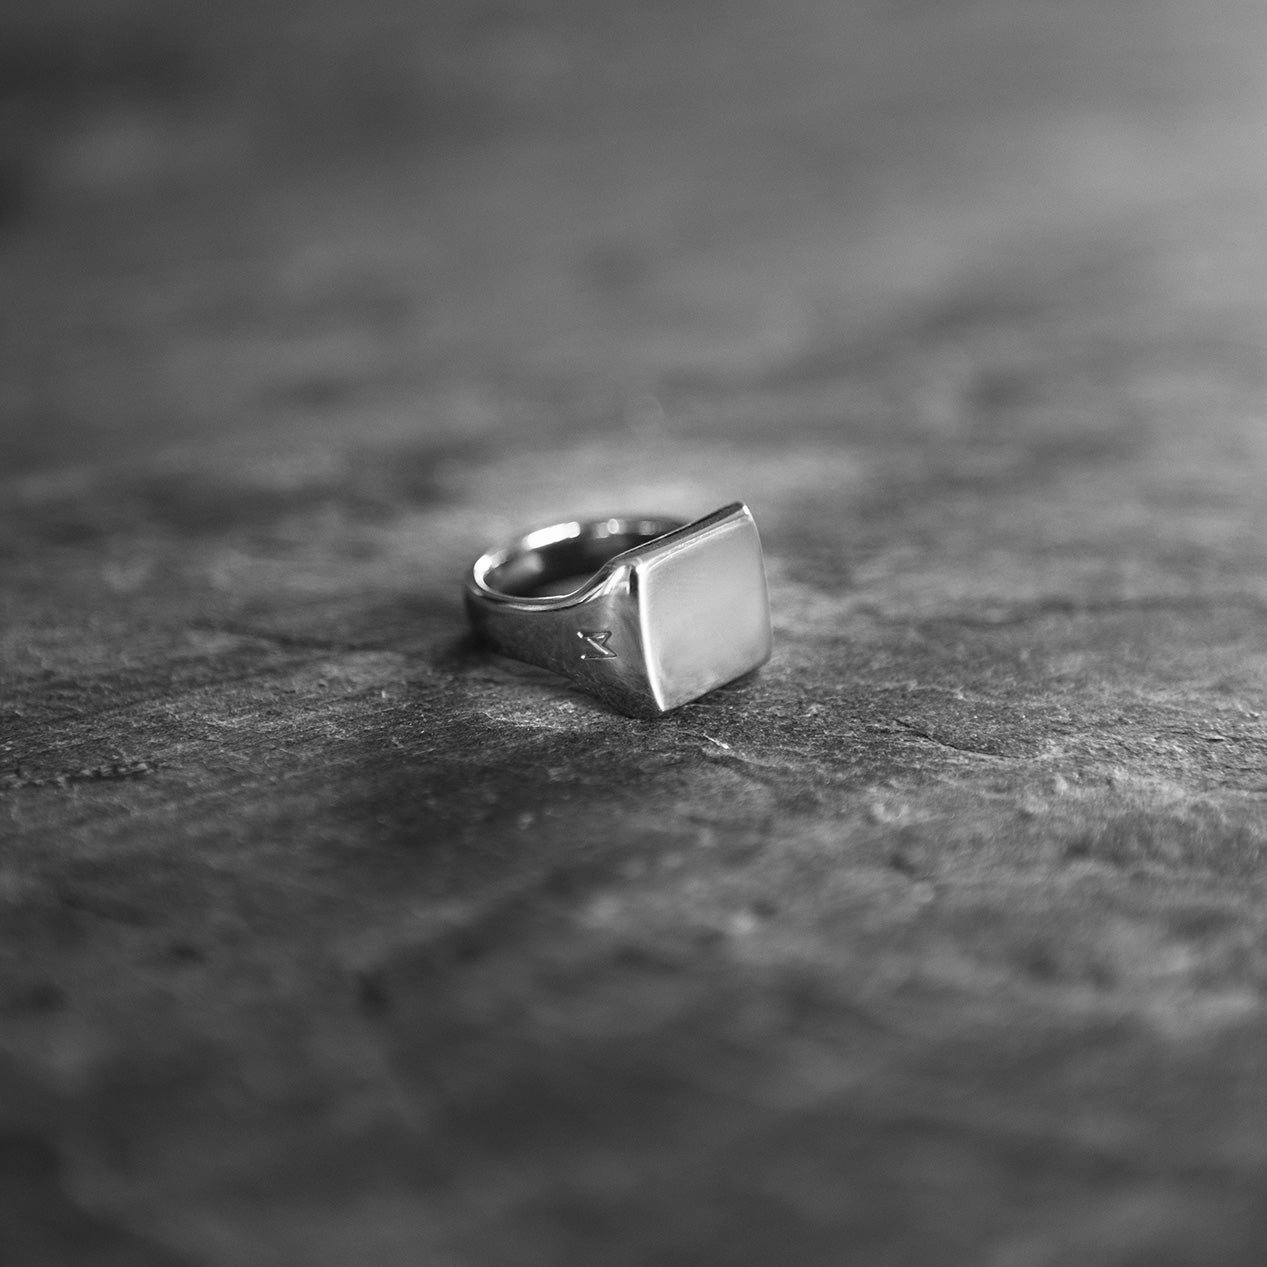 Single silver-colored titanium signet ring, 15x15 mm wide surface. the ring is laying on a rough surface.